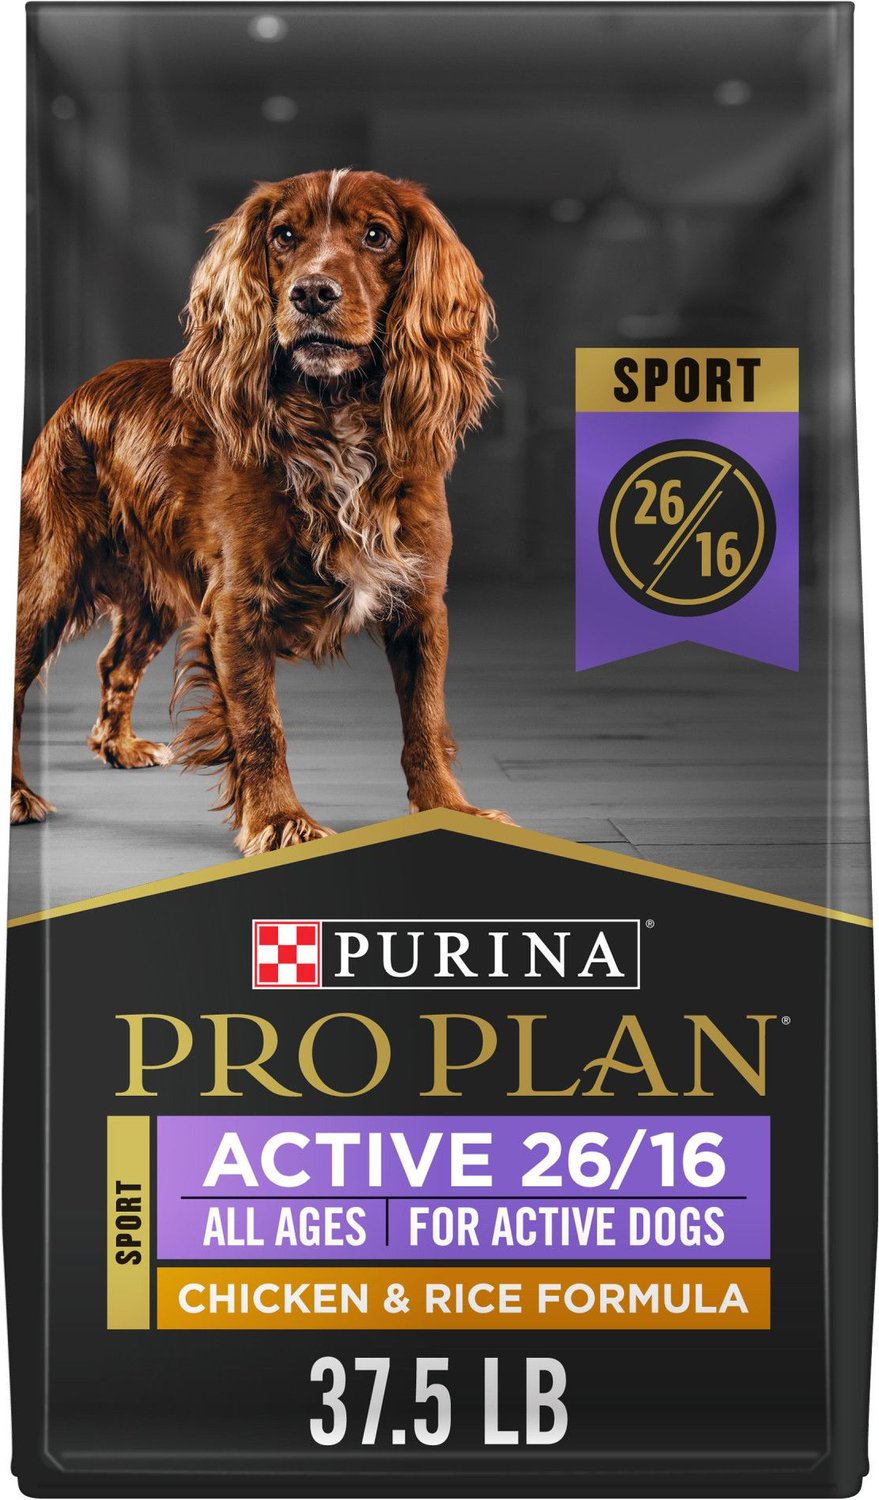 Purina Pro Plan Sport All Life Stages Active